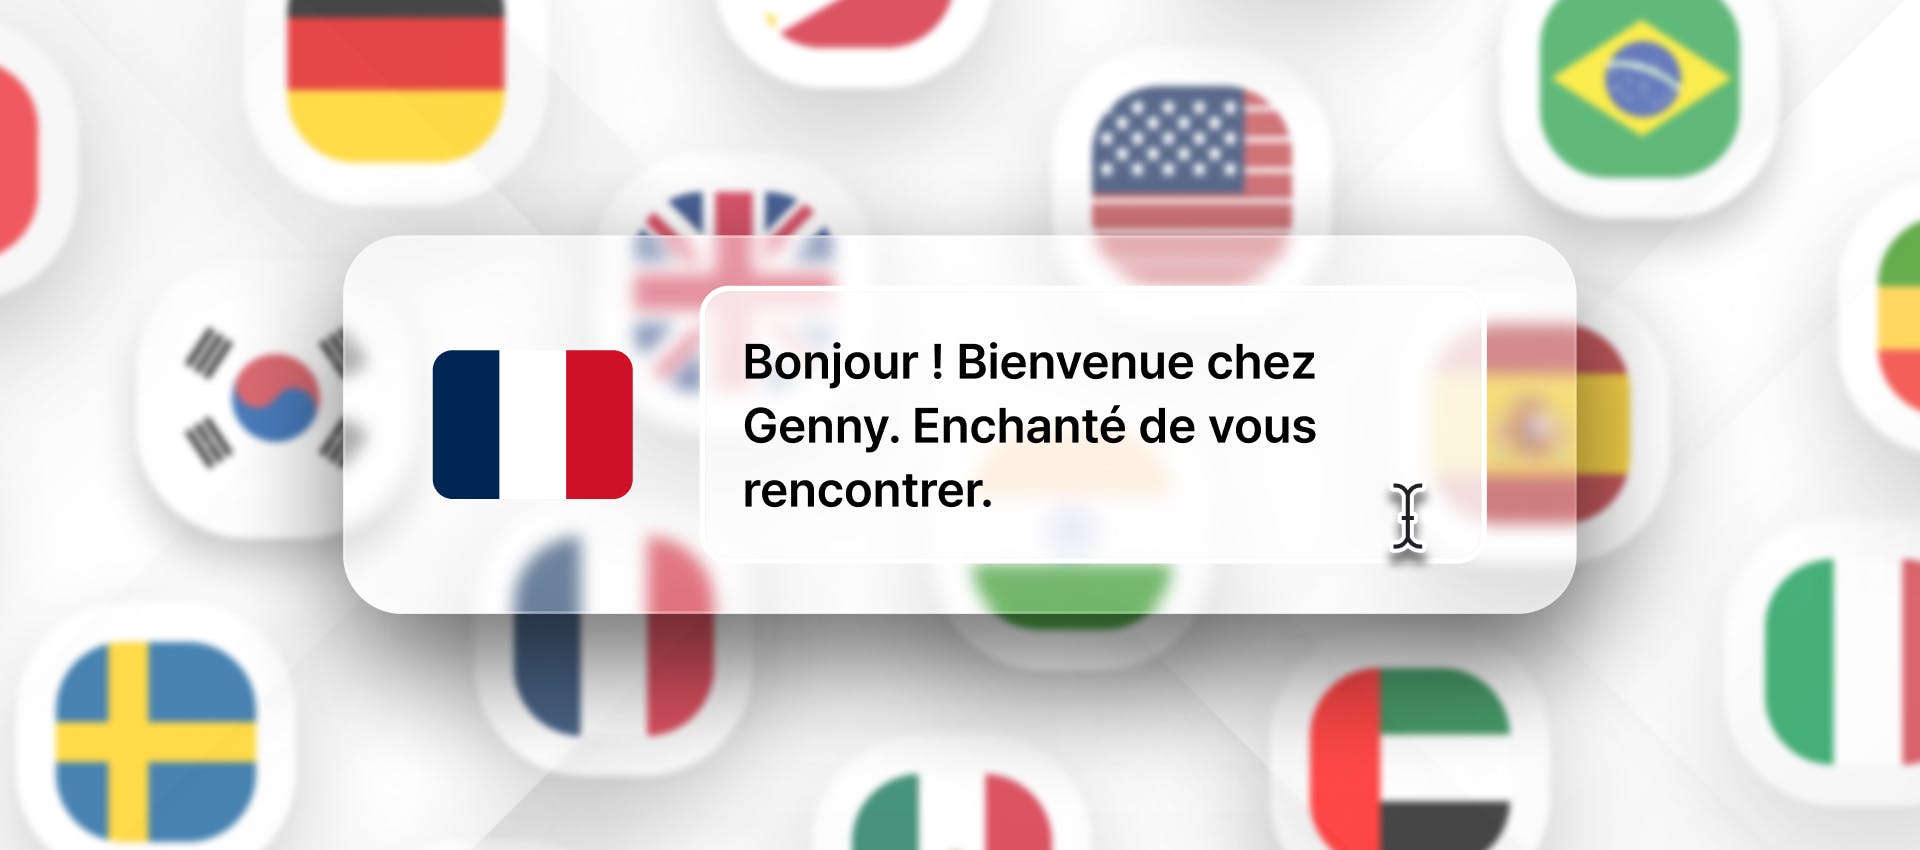 French phrase for TTS generation with background full of flags